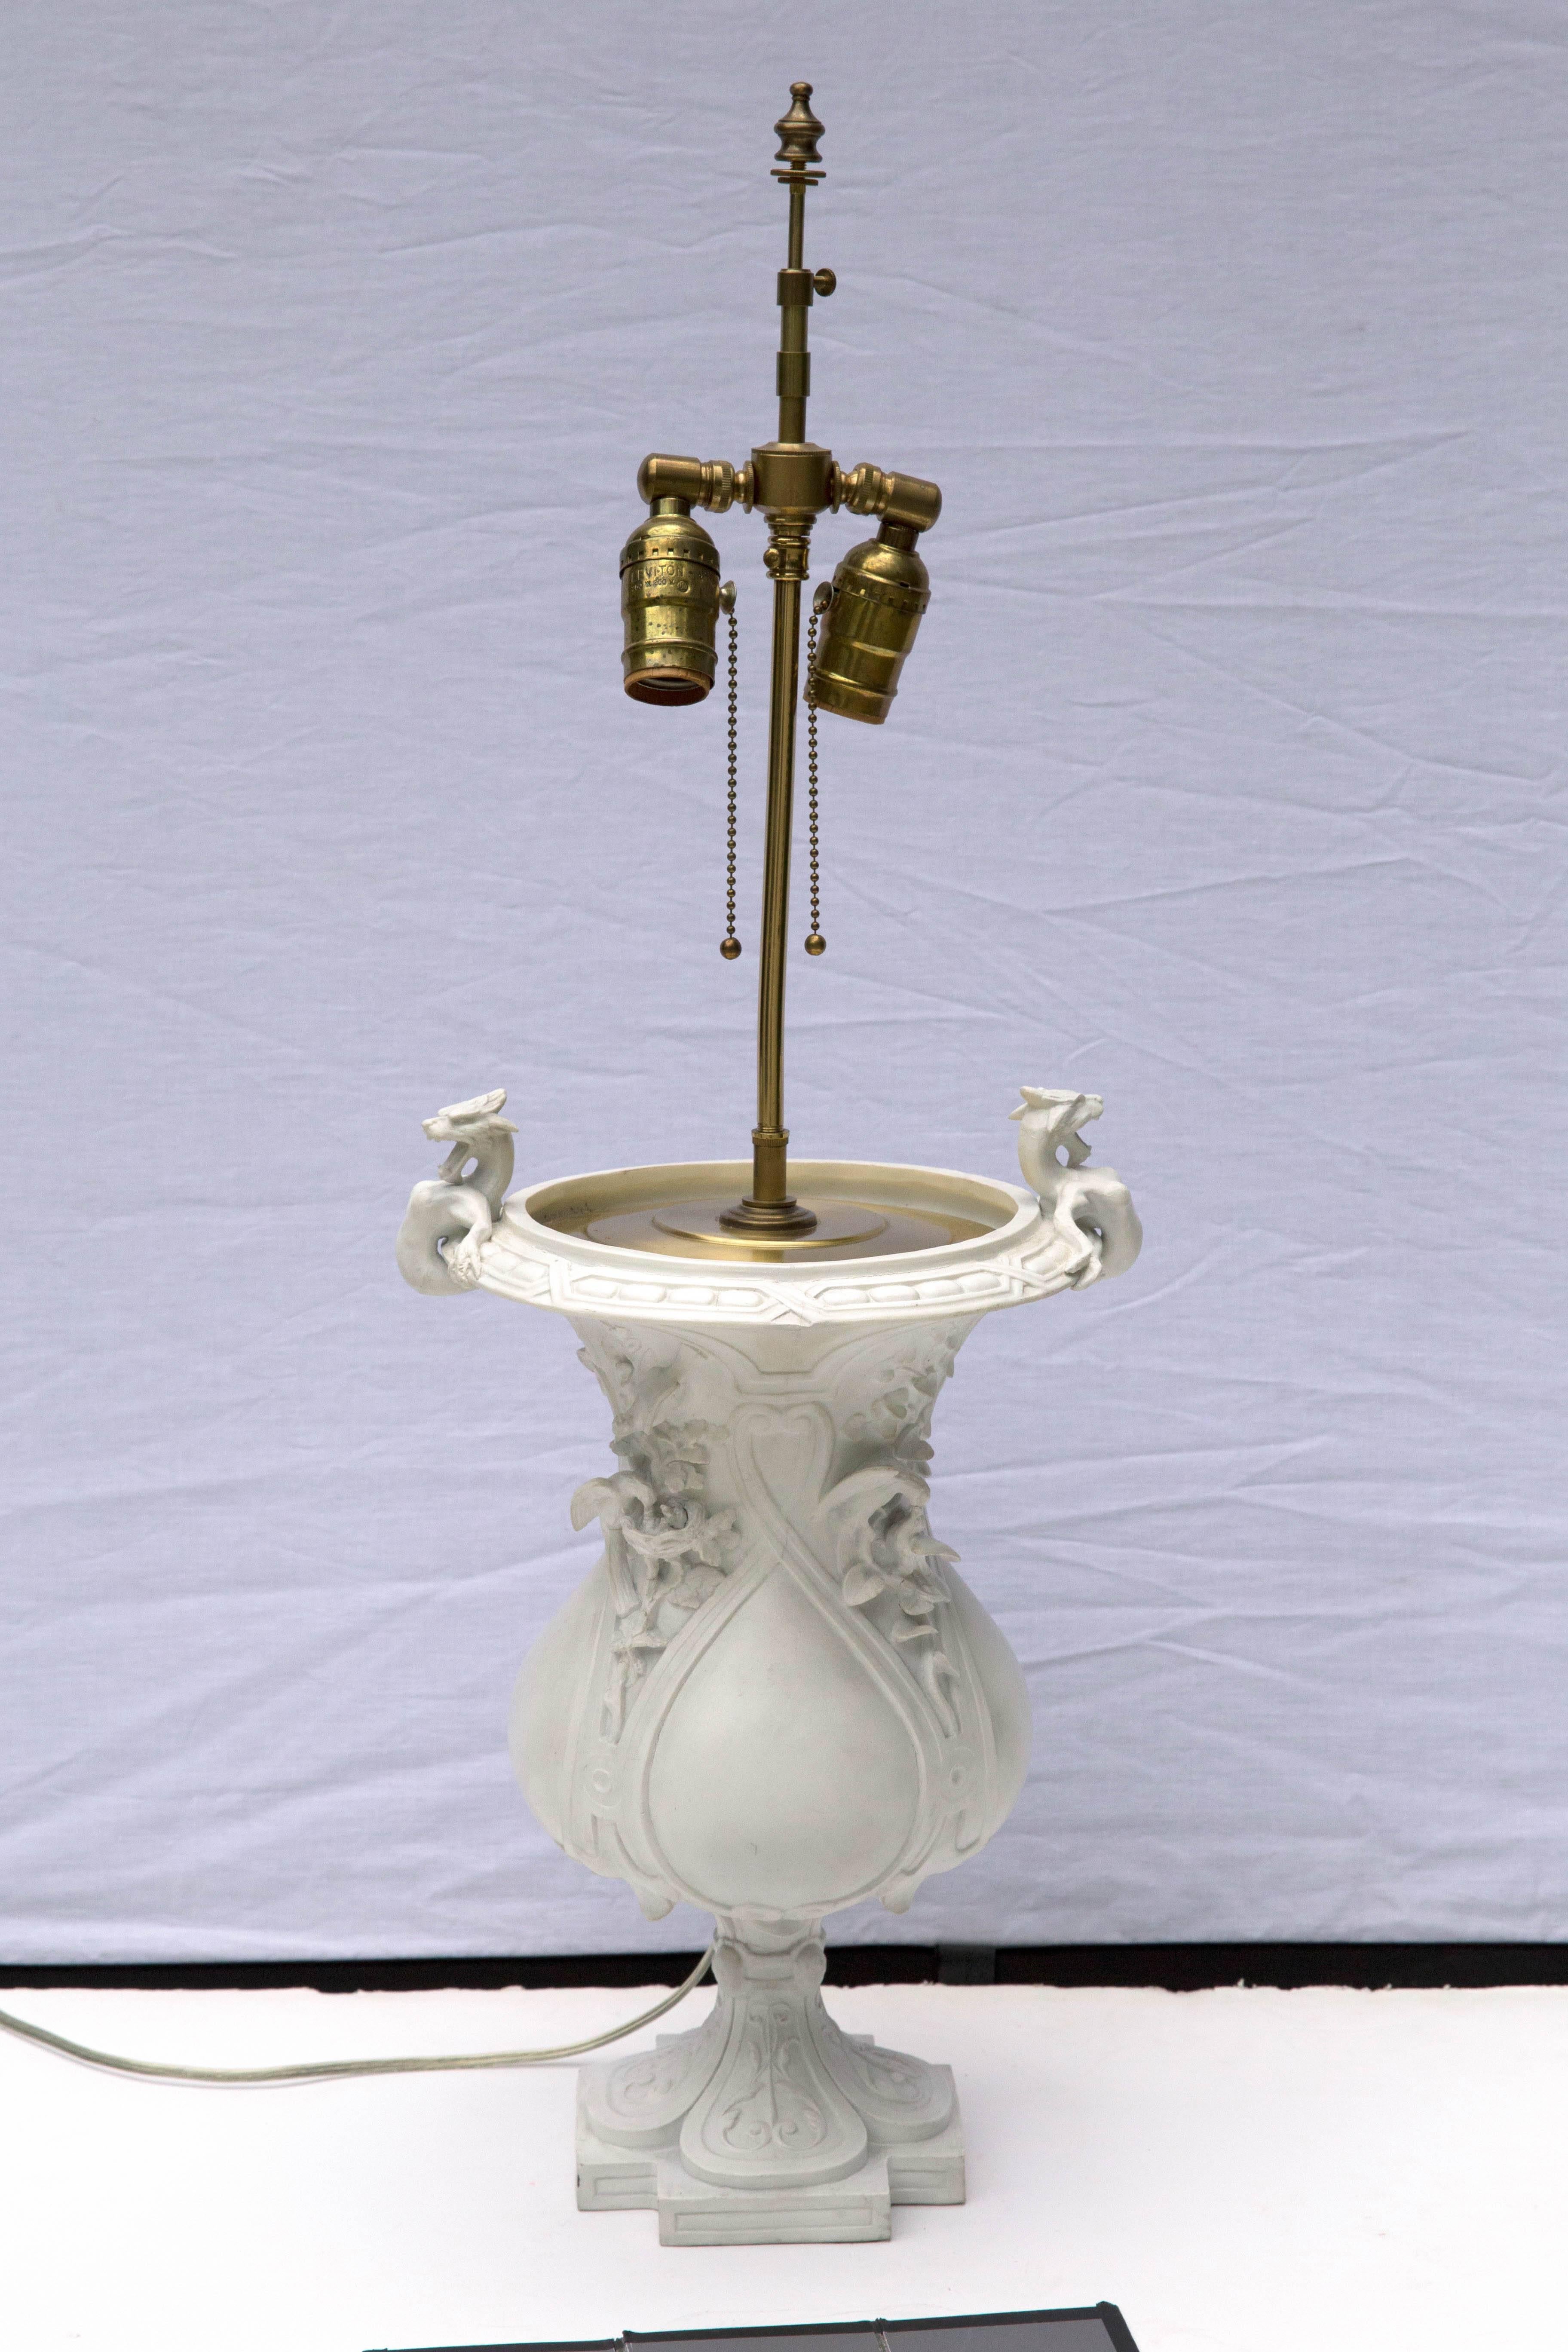 A decorative bisque porcelain urn marked by Jean Gille of Paris, France with a raised blue J over G, dating from 1840-1868. Now converted to a two socket table lamp with brass hardware. Measurements are the urn itself.